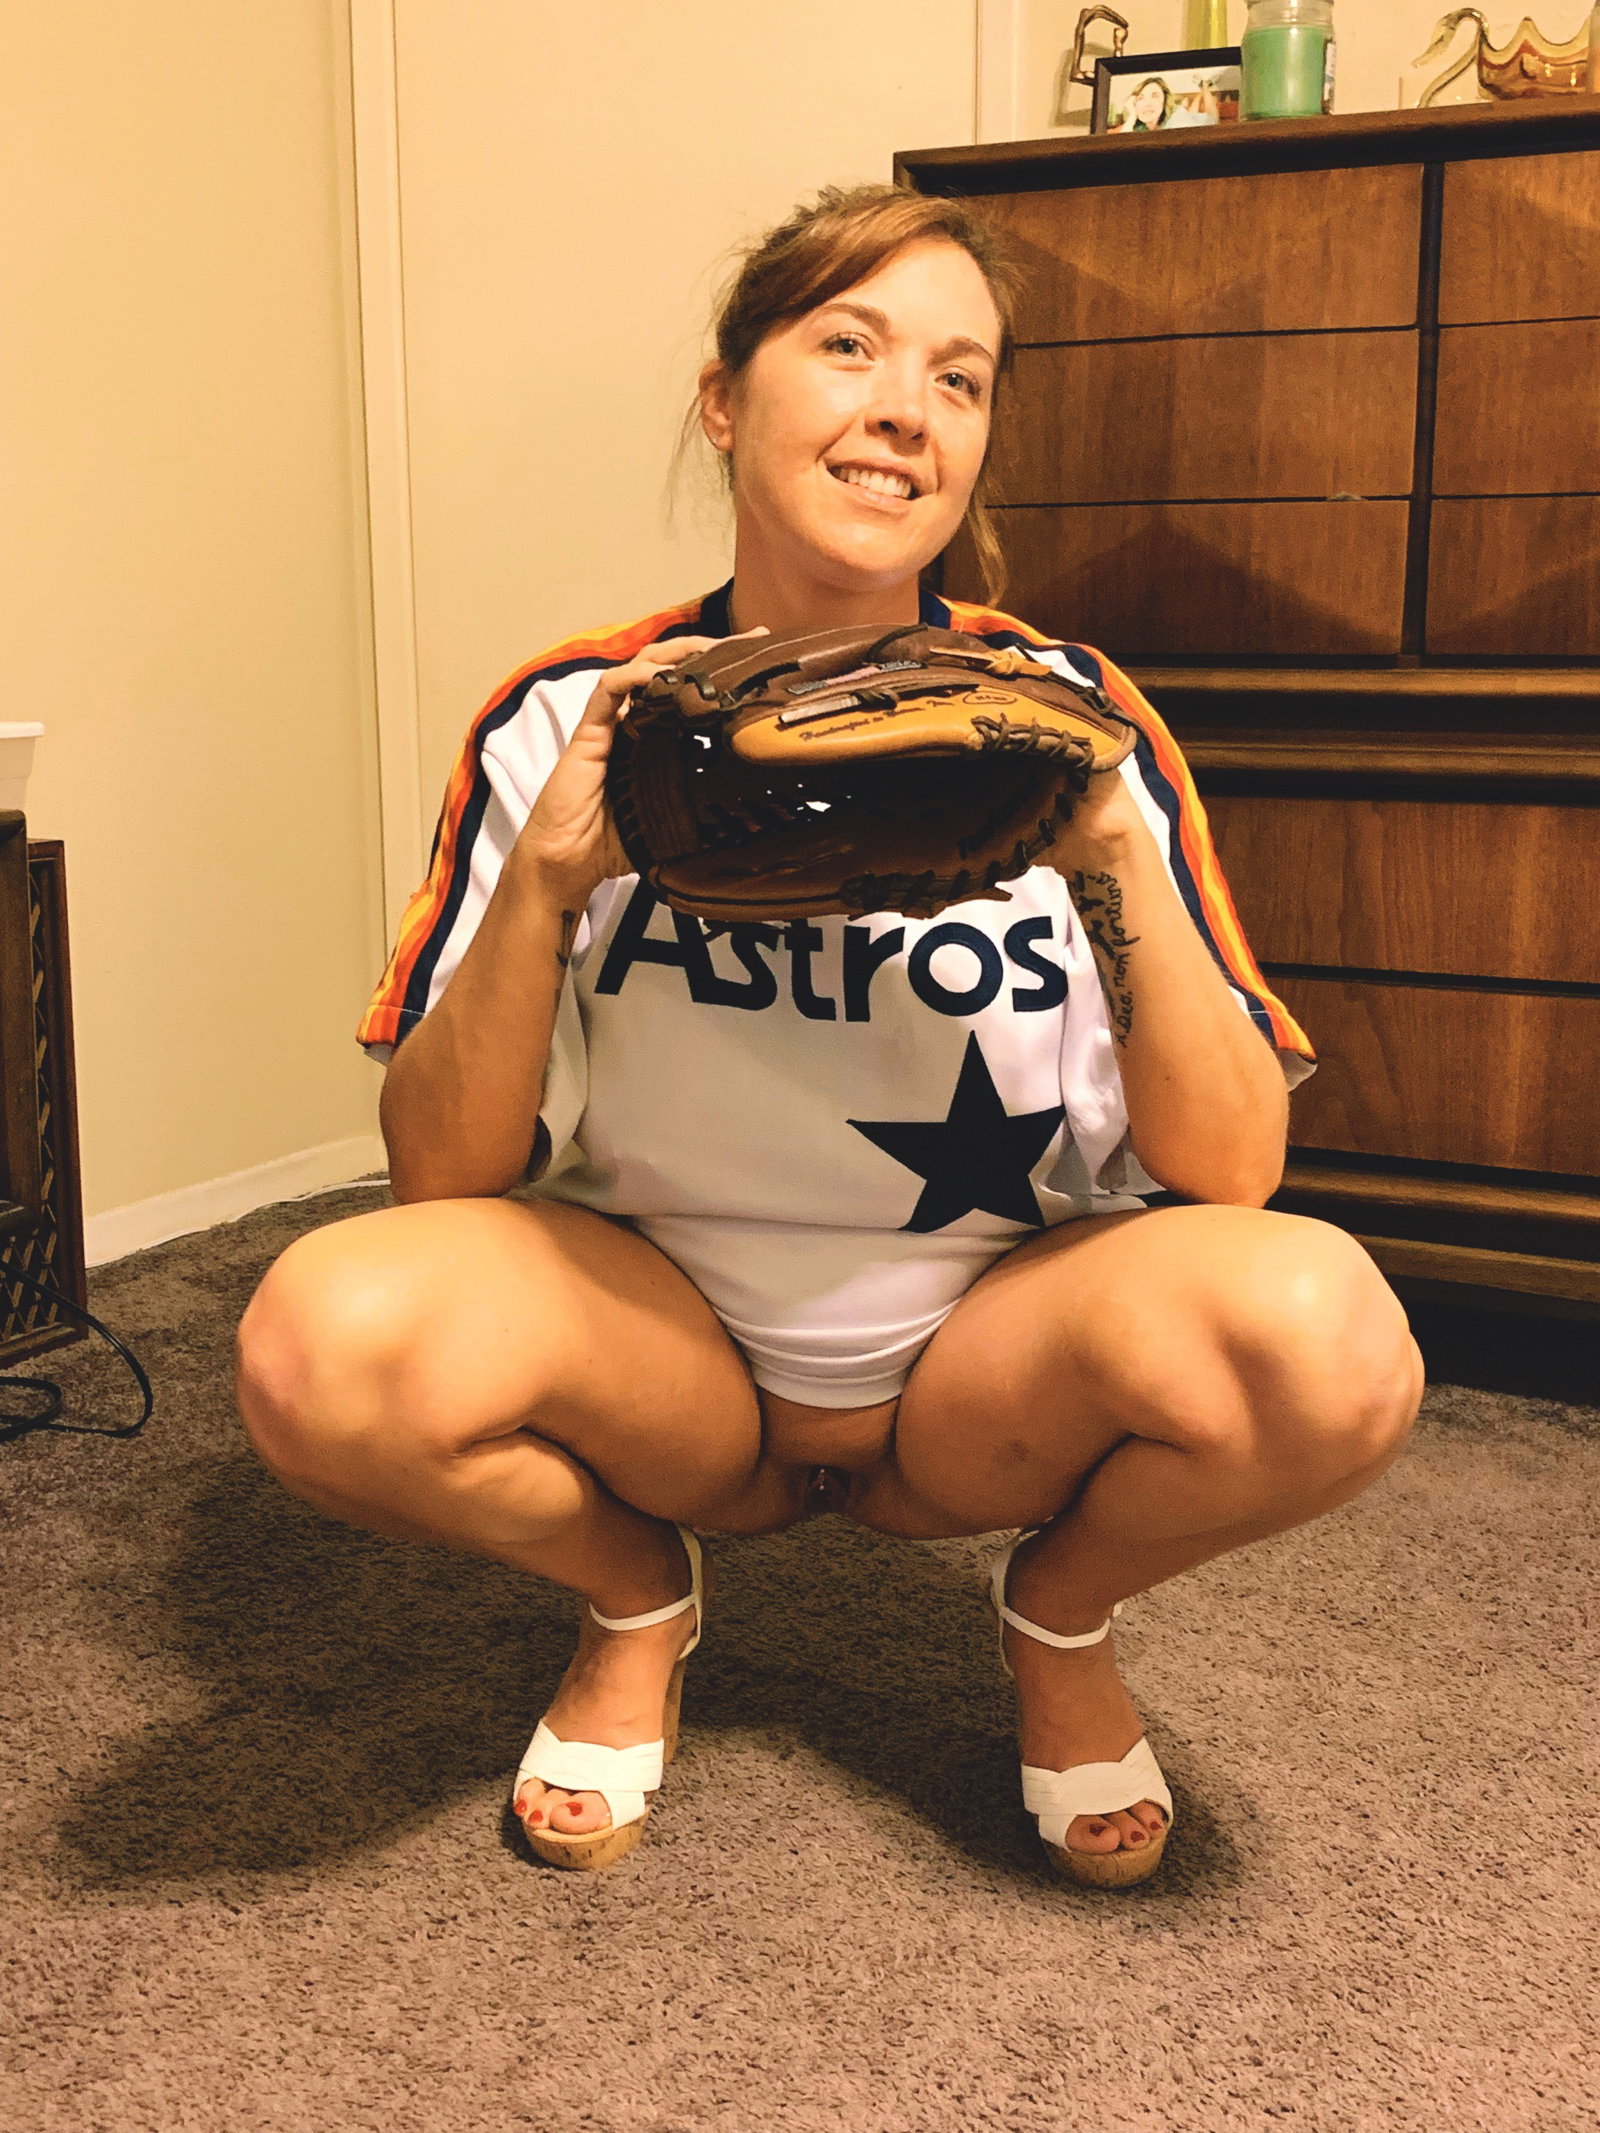 Photo by Denise La Fleur with the username @deniselafleur, who is a star user,  April 27, 2019 at 12:50 AM. The post is about the topic Amateurs and the text says 'I love this time of year!!!...Baseball Season!!!...I’m rooting for my favorite team!!!...Go ‘Stros!!!...who are you rooting for???...
#baseball #baseballseason #gostros #whosyourteam
#deniselafleur'